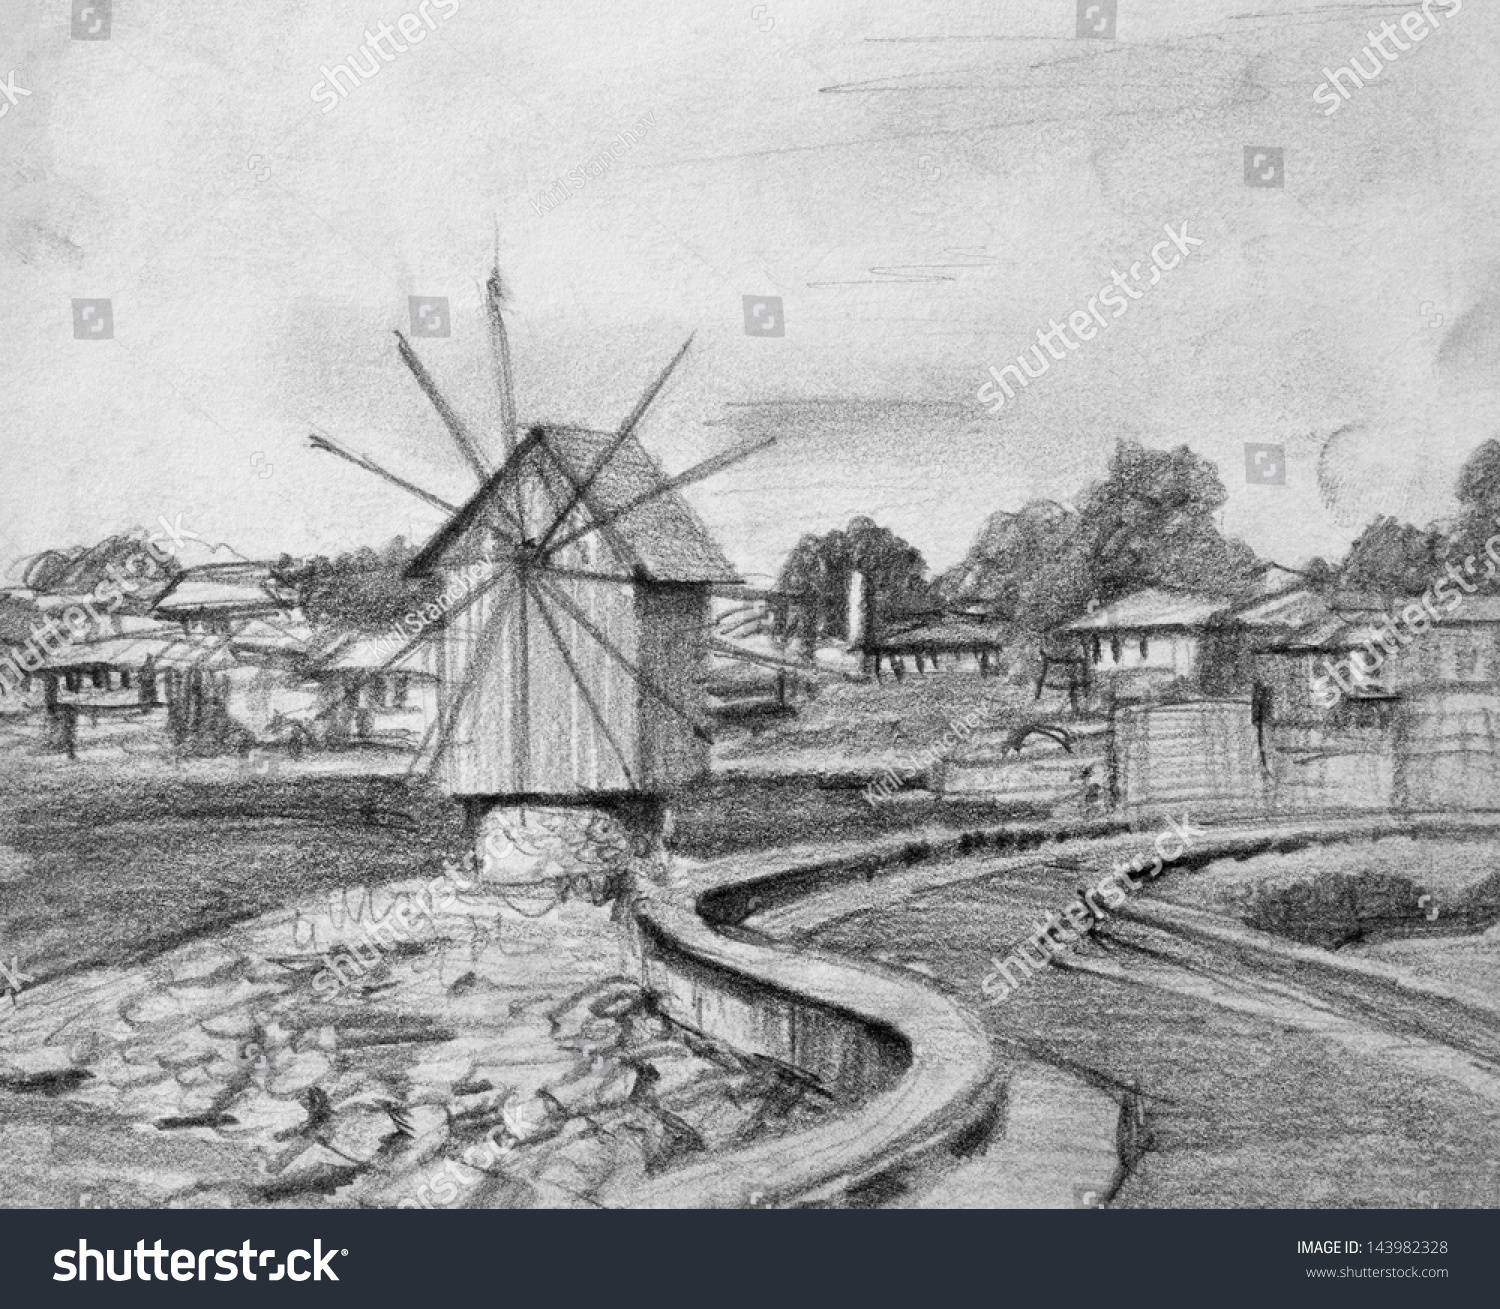 Black White Pencil Drawing Old Windmill: Stockillustration 143982328